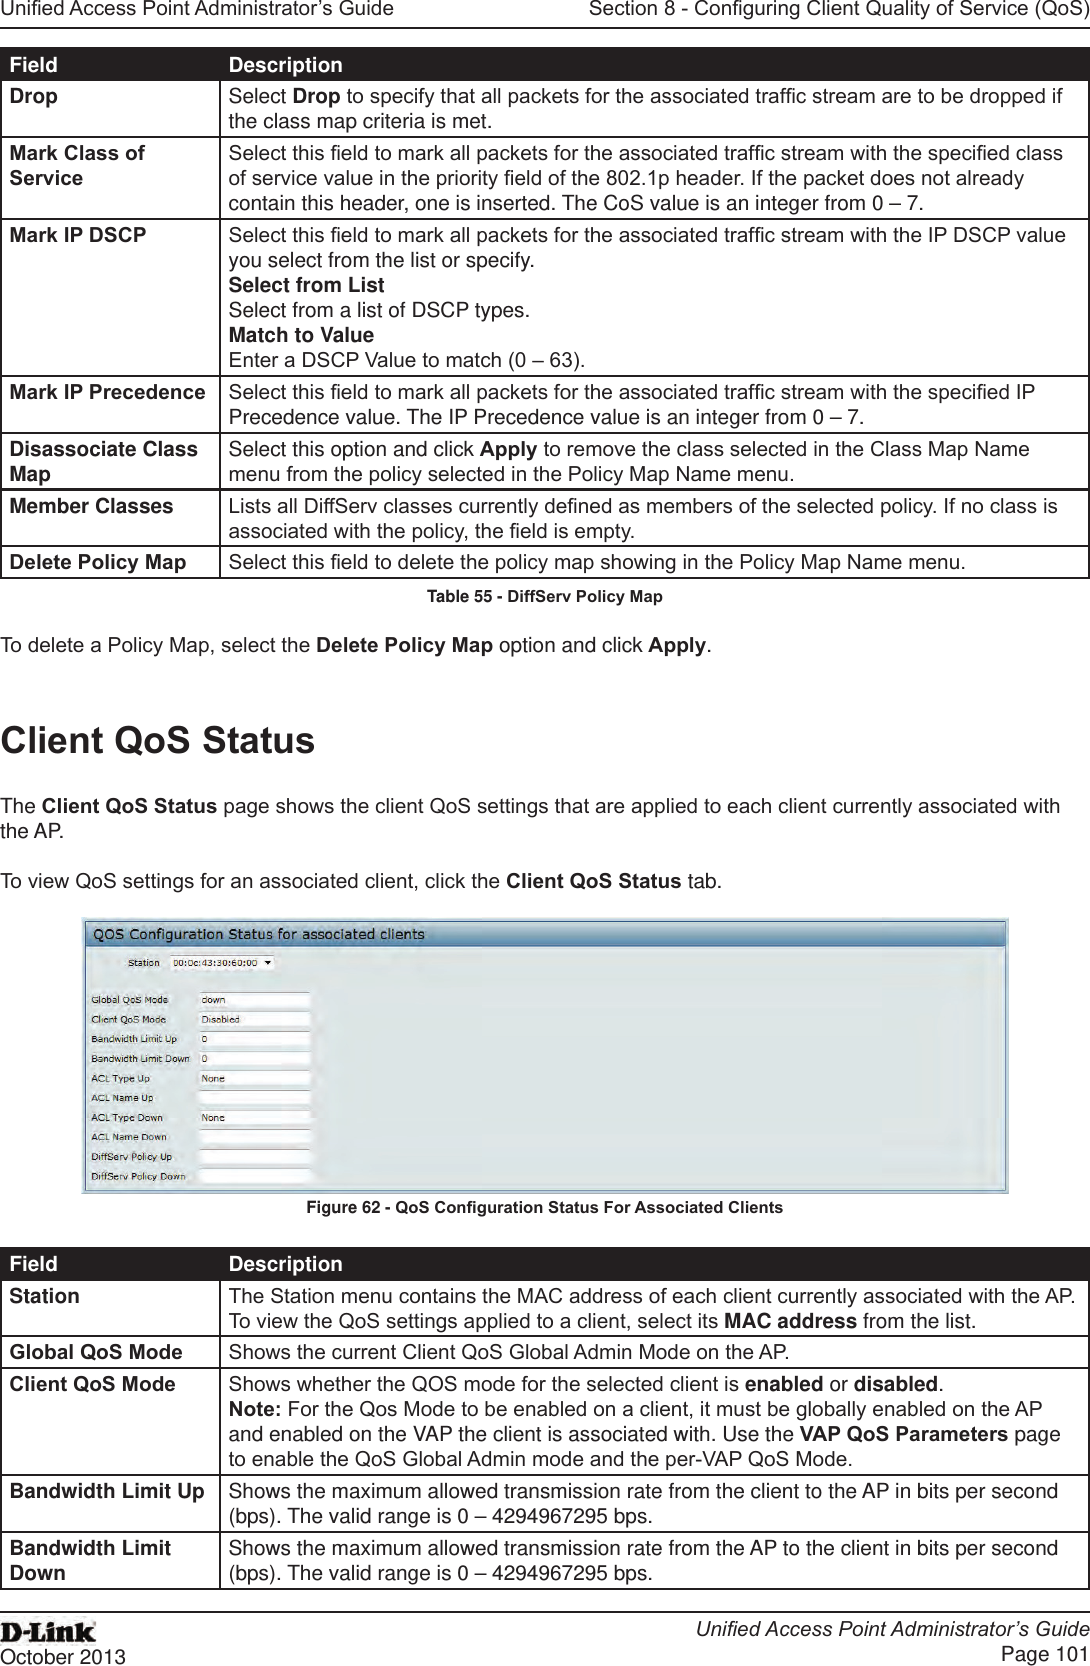 Unied Access Point Administrator’s GuideUnied Access Point Administrator’s GuidePage 101October 2013Section 8 - Conguring Client Quality of Service (QoS)Field DescriptionDrop Select Drop to specify that all packets for the associated trafc stream are to be dropped if the class map criteria is met.Mark Class of ServiceSelect this eld to mark all packets for the associated trafc stream with the specied class of service value in the priority eld of the 802.1p header. If the packet does not already contain this header, one is inserted. The CoS value is an integer from 0 – 7.Mark IP DSCP Select this eld to mark all packets for the associated trafc stream with the IP DSCP value you select from the list or specify. Select from List Select from a list of DSCP types. Match to Value Enter a DSCP Value to match (0 – 63).Mark IP Precedence Select this eld to mark all packets for the associated trafc stream with the specied IP Precedence value. The IP Precedence value is an integer from 0 – 7.Disassociate Class Map Select this option and click Apply to remove the class selected in the Class Map Name menu from the policy selected in the Policy Map Name menu.Member Classes Lists all DiffServ classes currently dened as members of the selected policy. If no class is associated with the policy, the eld is empty.Delete Policy Map Select this eld to delete the policy map showing in the Policy Map Name menu.Table 55 - DiffServ Policy MapTo delete a Policy Map, select the Delete Policy Map option and click Apply. Client QoS StatusThe Client QoS Status page shows the client QoS settings that are applied to each client currently associated with the AP.To view QoS settings for an associated client, click the Client QoS Status tab.Figure 62 - QoS Conguration Status For Associated ClientsField DescriptionStation The Station menu contains the MAC address of each client currently associated with the AP. To view the QoS settings applied to a client, select its MAC address from the list.Global QoS Mode Shows the current Client QoS Global Admin Mode on the AP.Client QoS Mode Shows whether the QOS mode for the selected client is enabled or disabled. Note: For the Qos Mode to be enabled on a client, it must be globally enabled on the AP and enabled on the VAP the client is associated with. Use the VAP QoS Parameters page to enable the QoS Global Admin mode and the per-VAP QoS Mode.Bandwidth Limit Up Shows the maximum allowed transmission rate from the client to the AP in bits per second (bps). The valid range is 0 – 4294967295 bps.Bandwidth Limit Down Shows the maximum allowed transmission rate from the AP to the client in bits per second (bps). The valid range is 0 – 4294967295 bps.